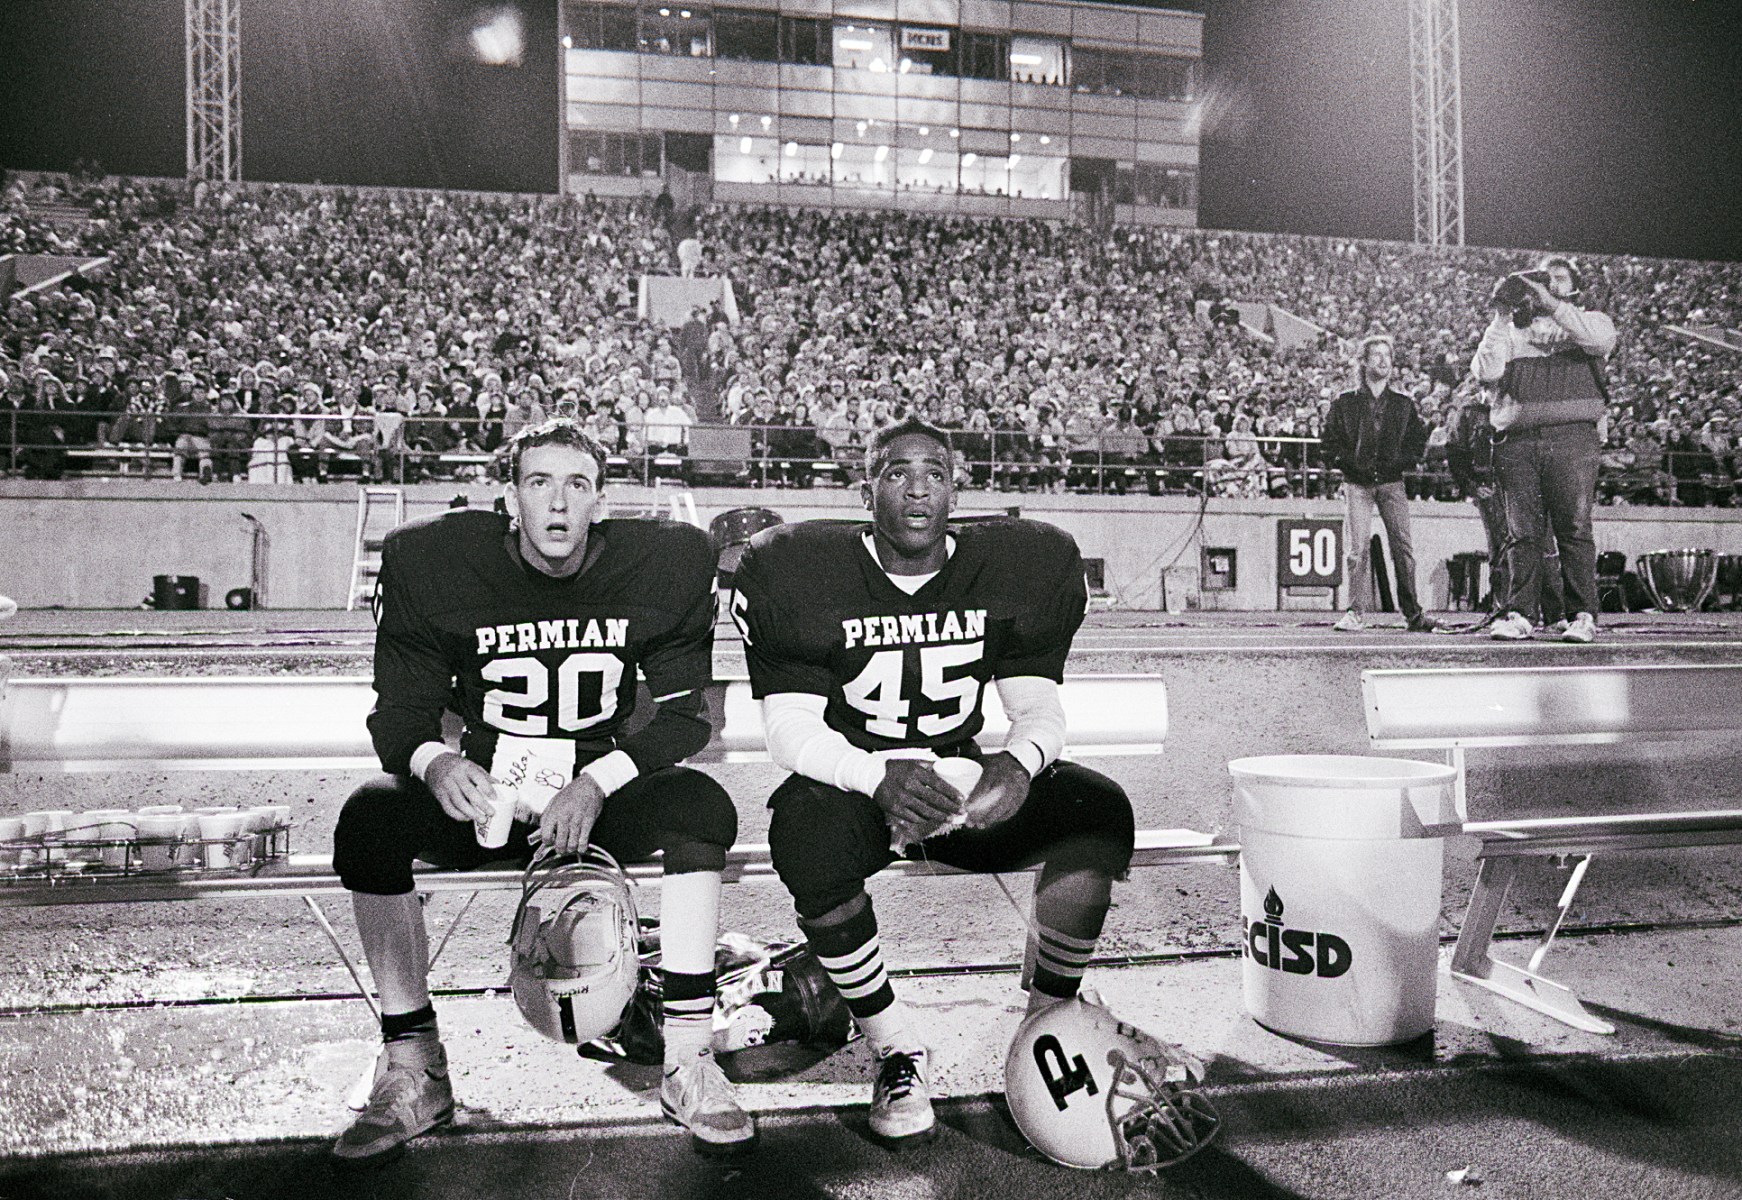 Mike Winchell (20) and Chris Comer (45) sit in stunned silence as they realize a game against Midland Lee is lost and there will be no heroic comeback. Permian entered the night as a 21-point favorite.<br><br>“This was fairly late in the game. Winchell was the quarterback and Comer was the running back,” Clark says. “There's a whole series of them  looking around and then their mouths are kind of agape because of a play they just watched. I wouldn't say they were dejected, but they were a little concerned about where the game was going.”